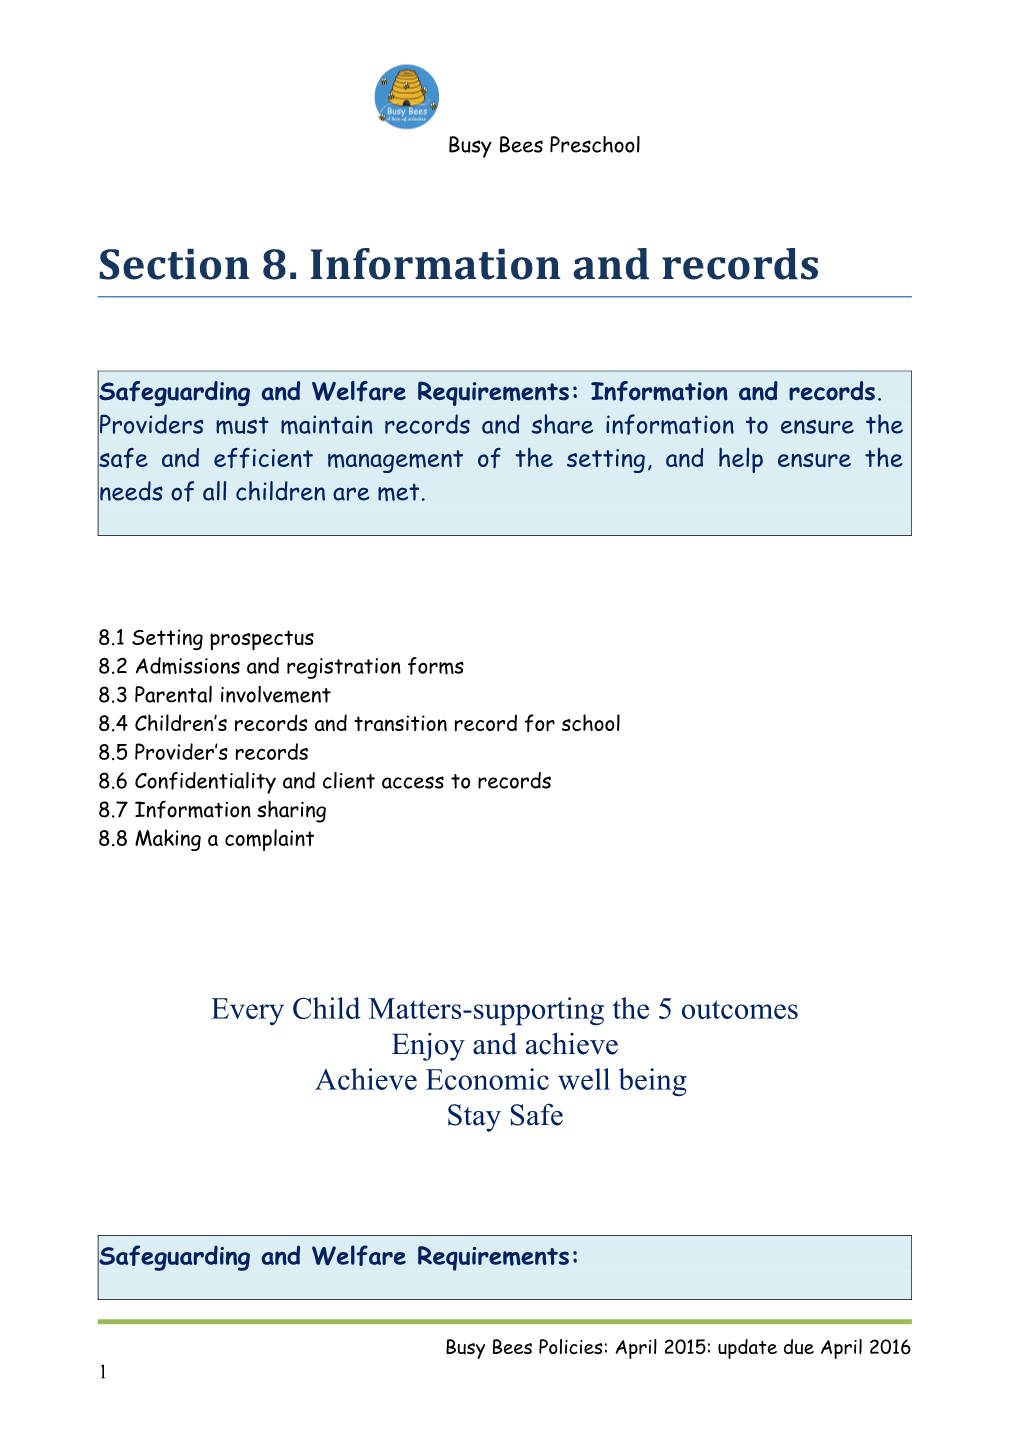 Section 8. Information and Records